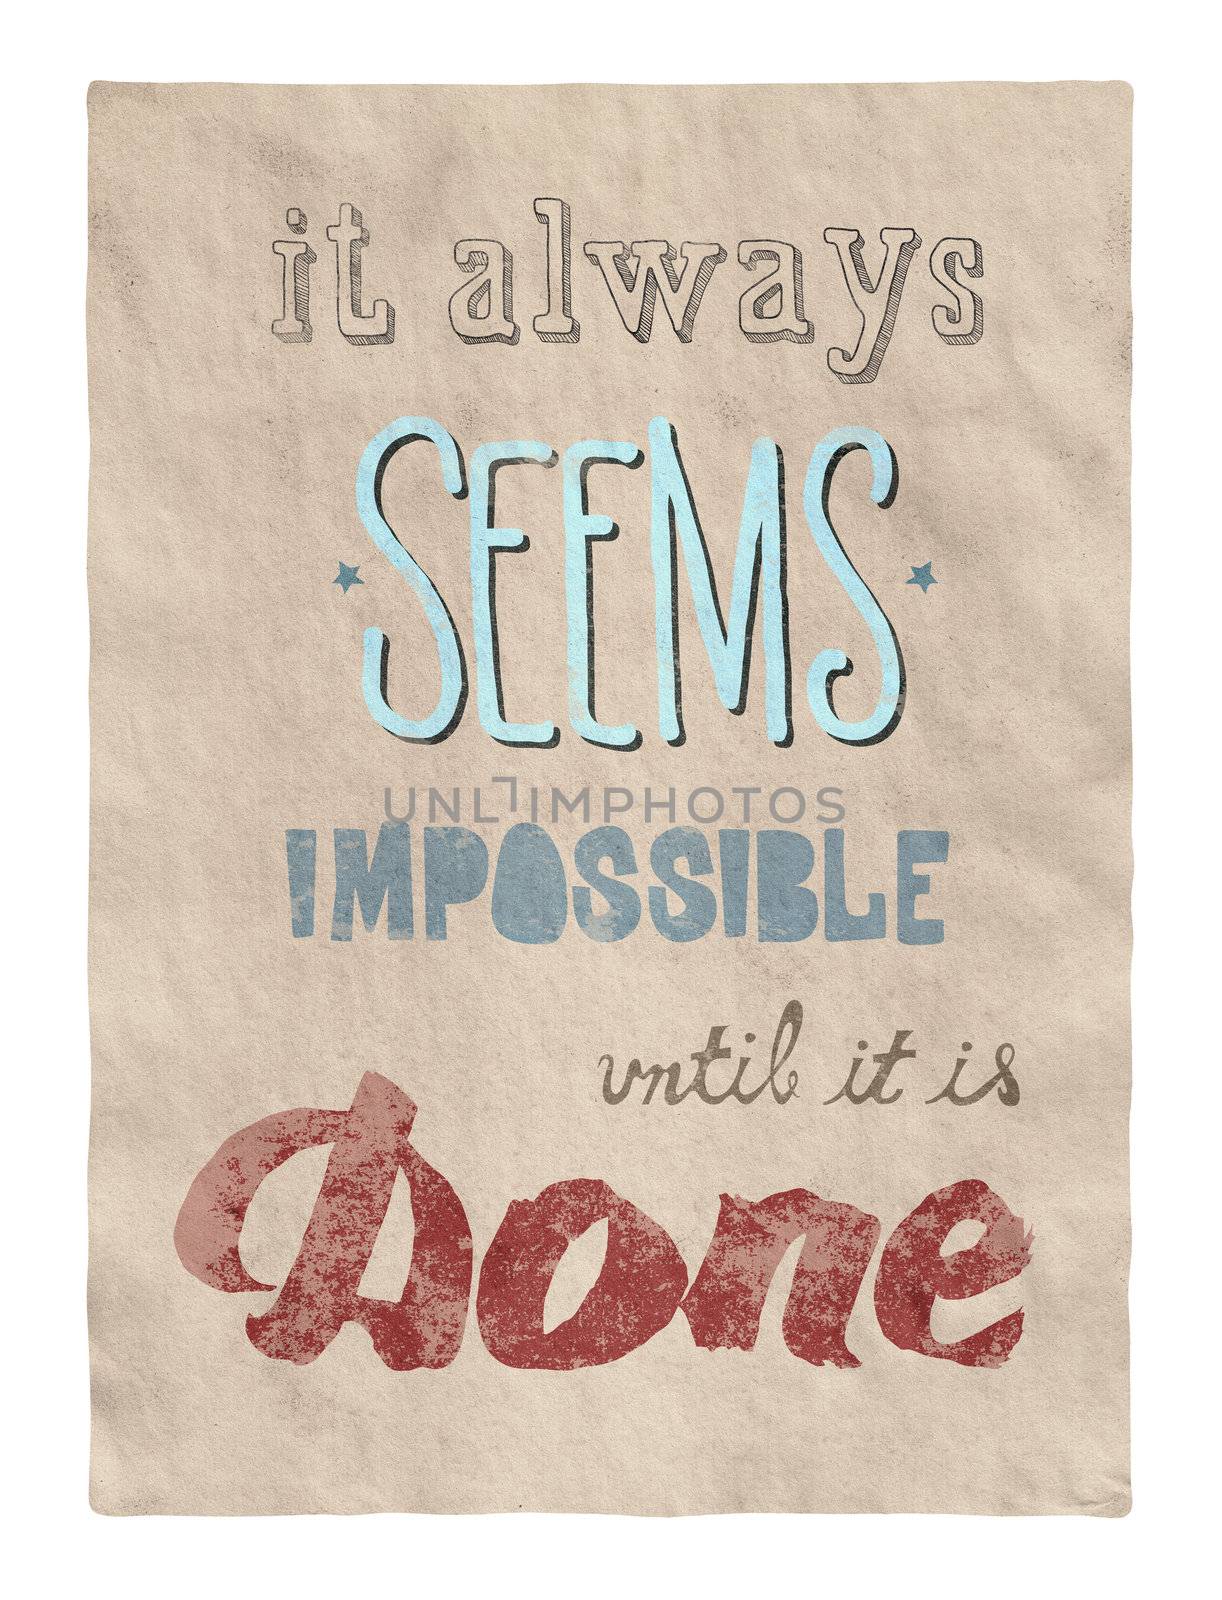 Retro style motivational poster with calligraphy text encouraging people to remember that even that which seems impossible is possible to achieve